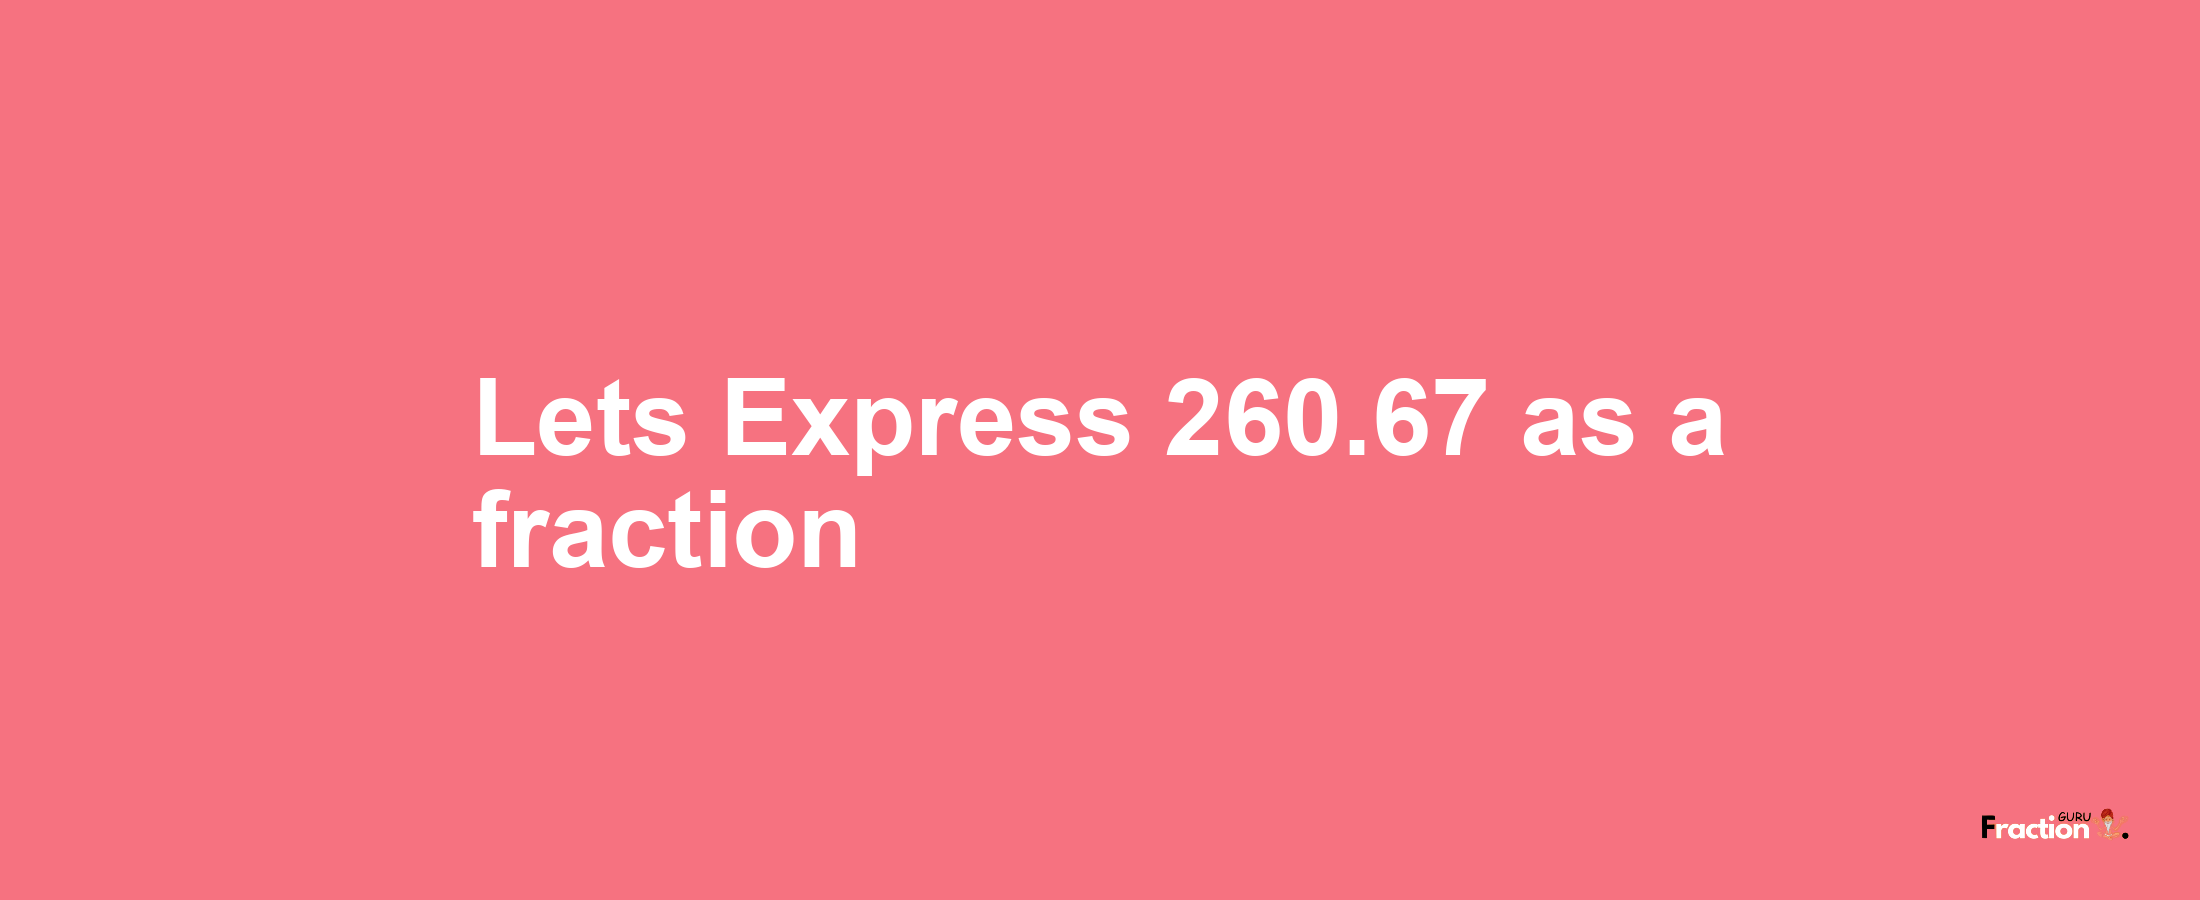 Lets Express 260.67 as afraction